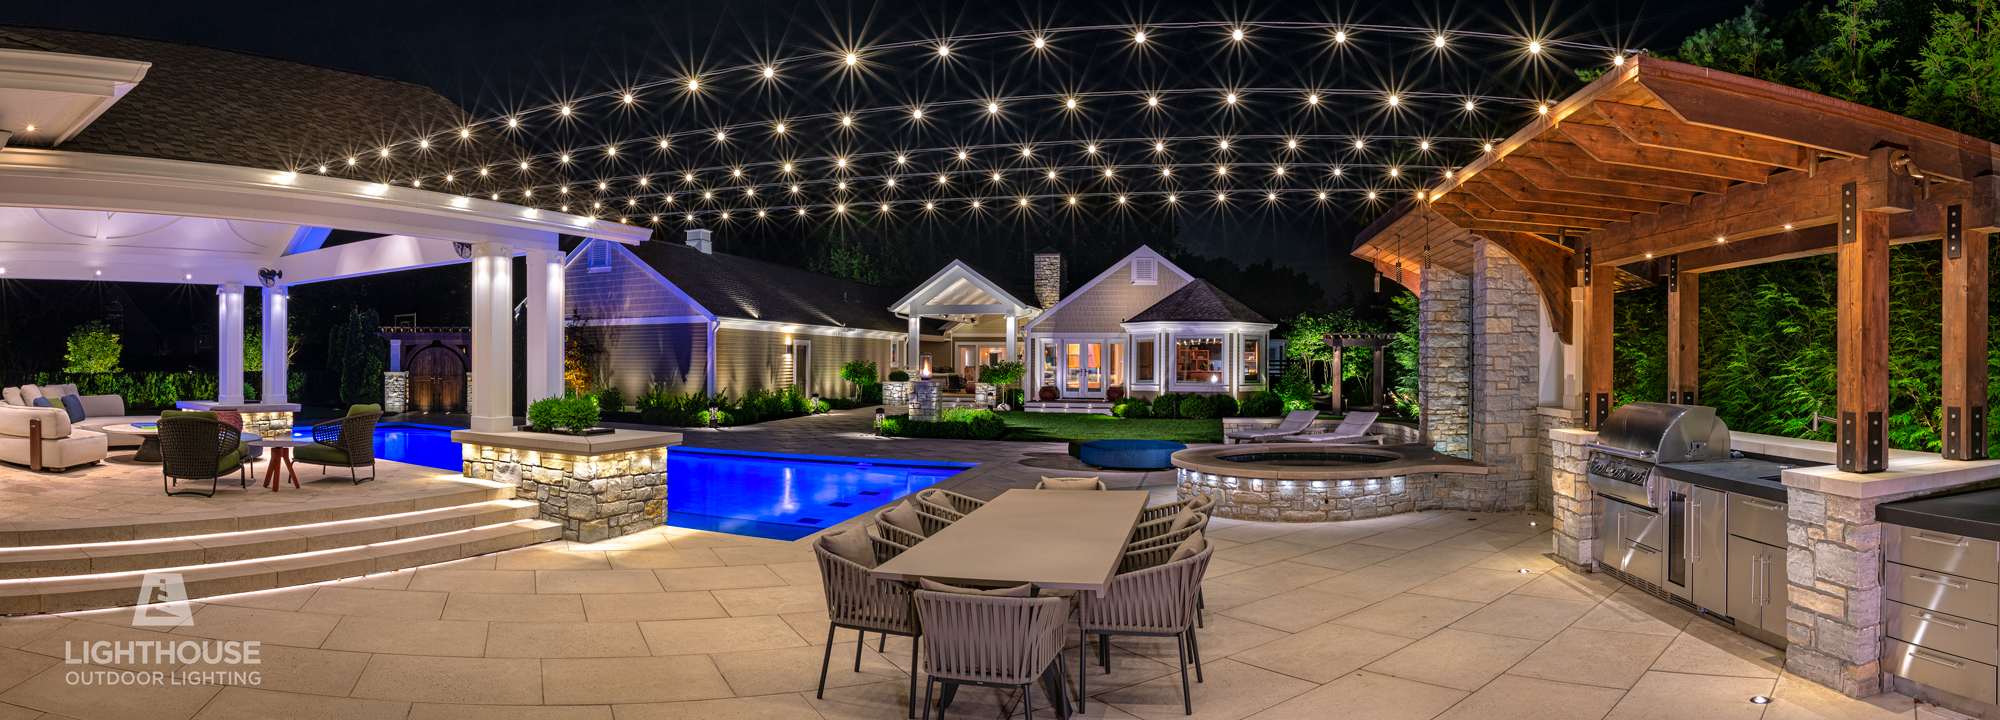 Patio String Lighting in Lionville, PA